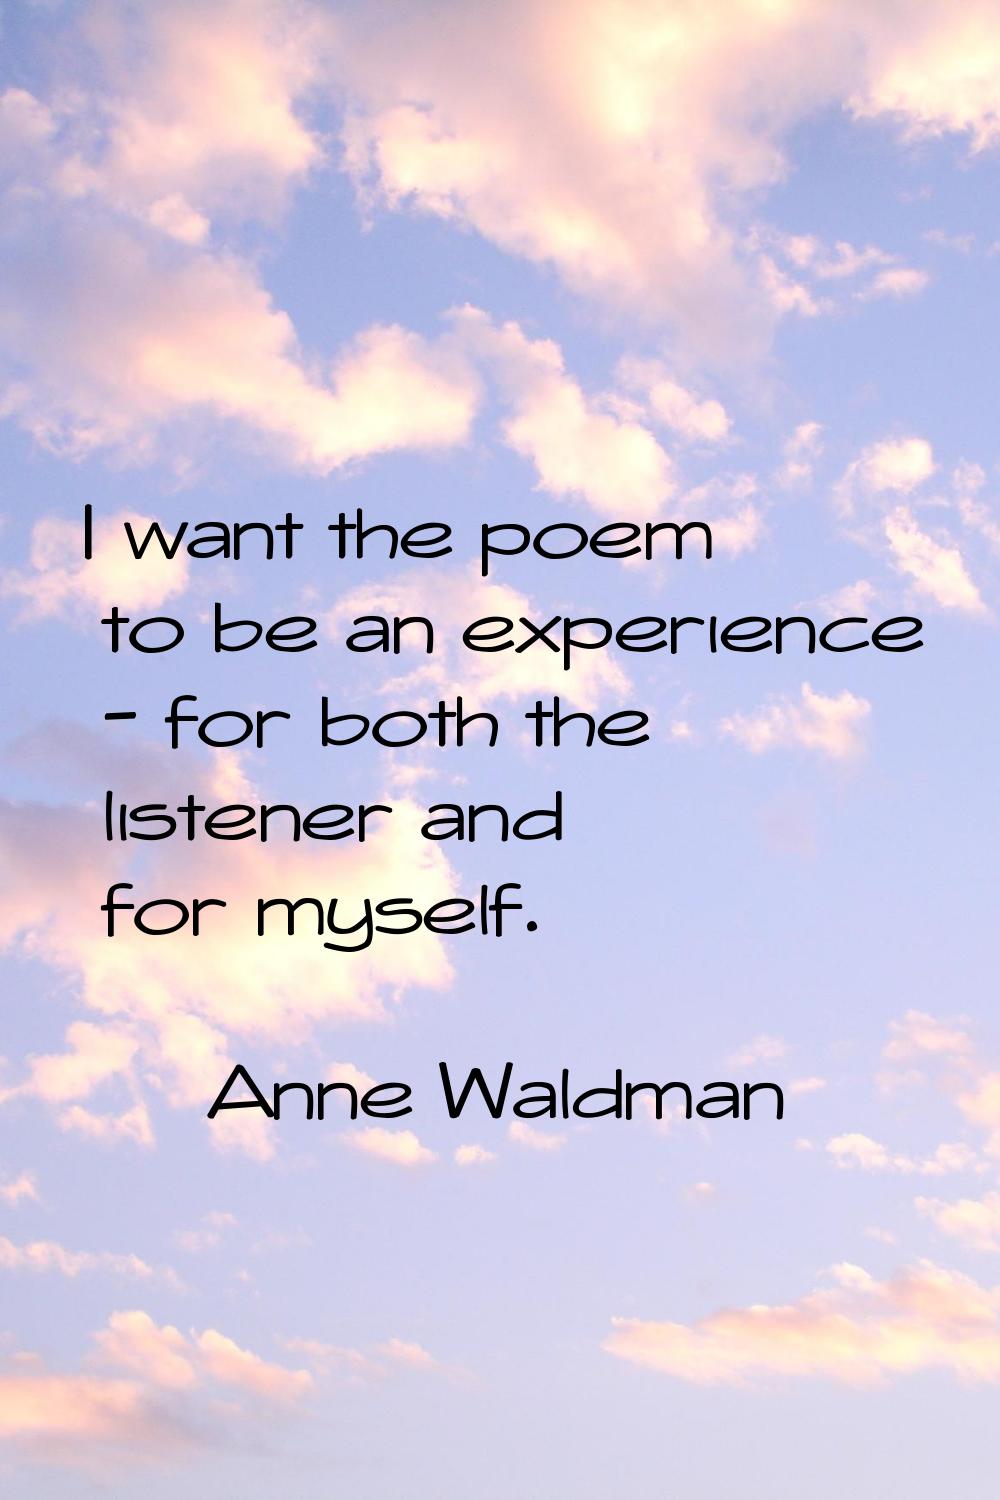 I want the poem to be an experience - for both the listener and for myself.